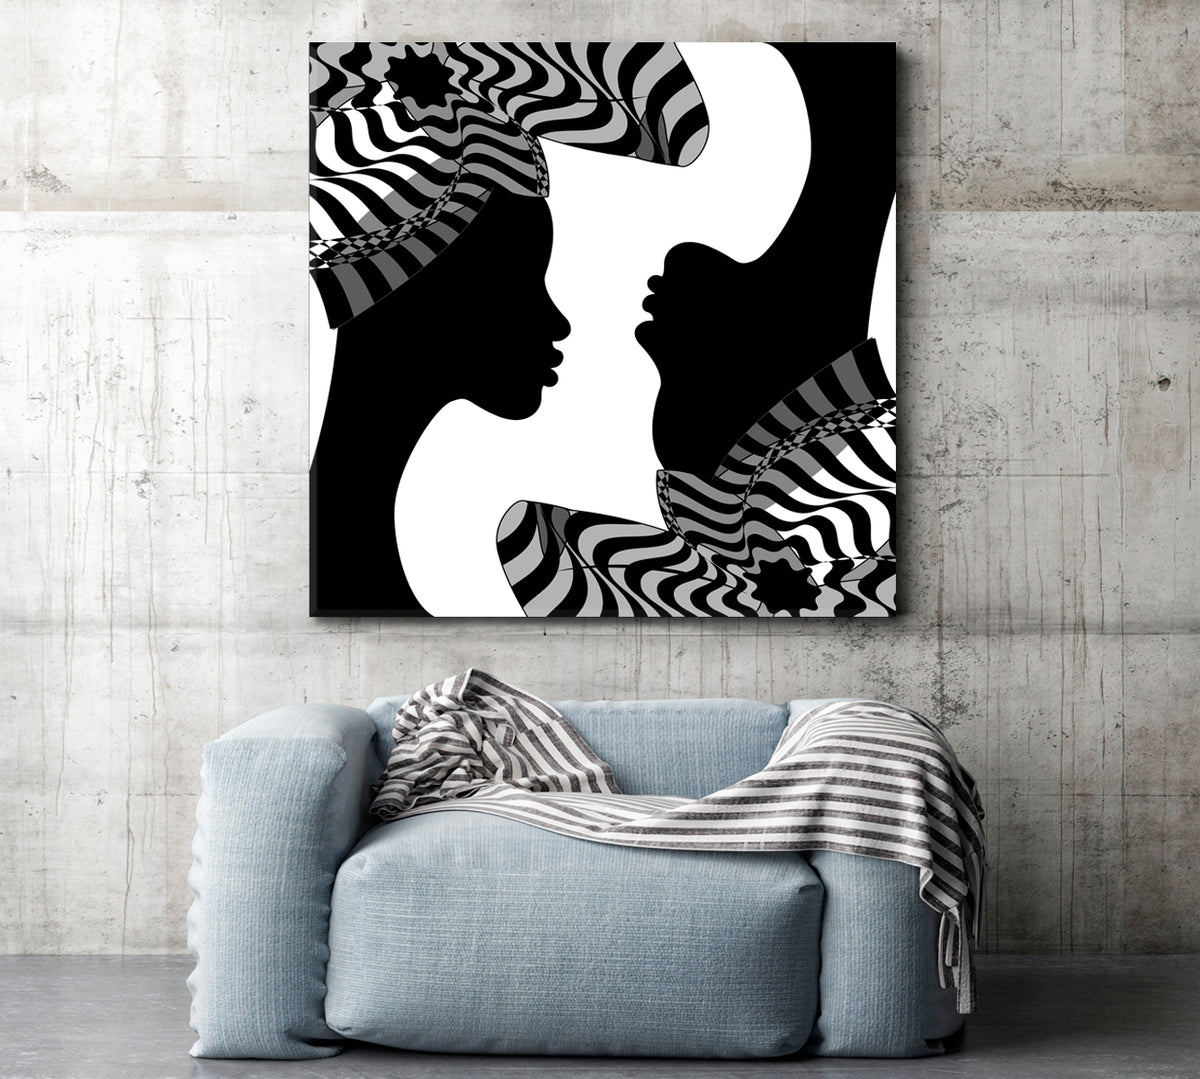 Black Women Striped Turban Abstract Poster Black and White Wall Art Print Artesty 1 Panel 12"x12" 